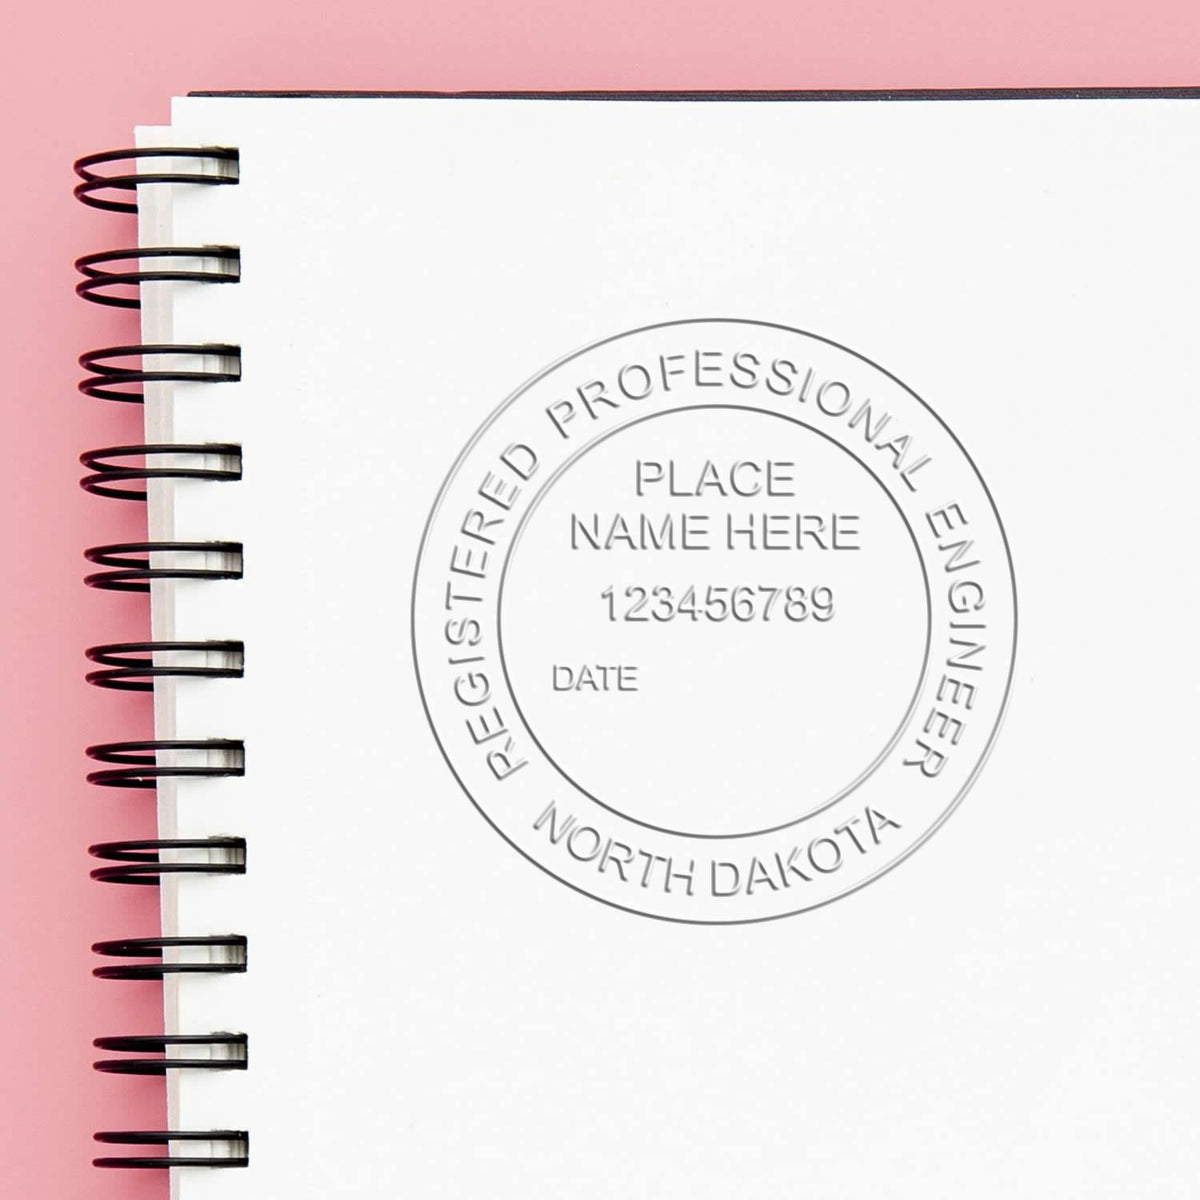 A stamped impression of the Long Reach North Dakota PE Seal in this stylish lifestyle photo, setting the tone for a unique and personalized product.